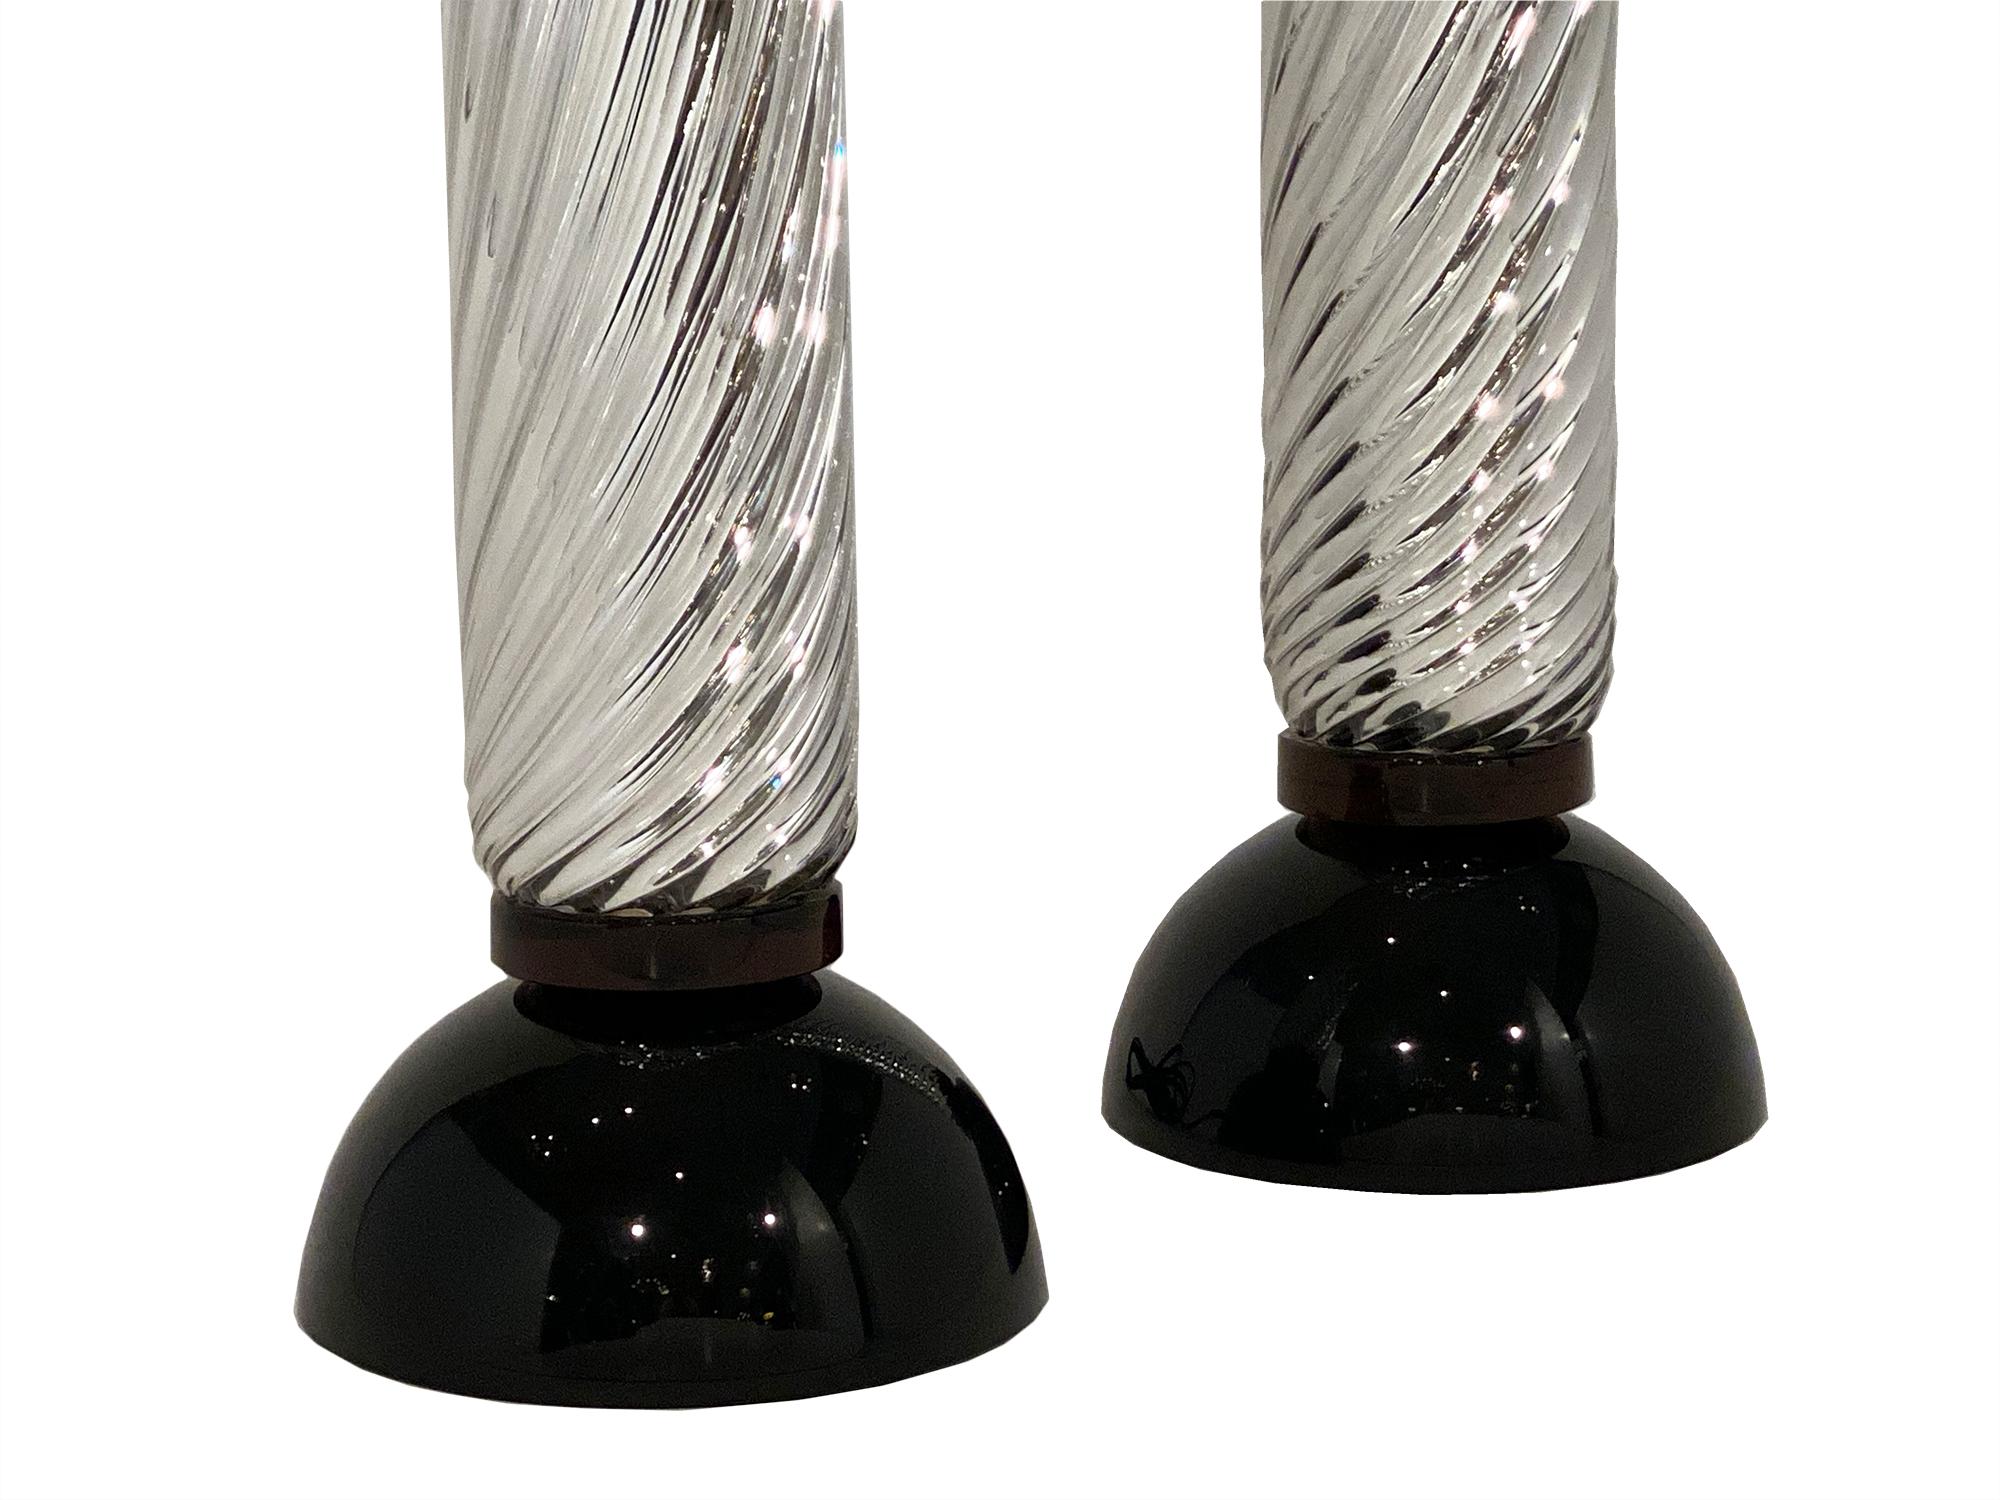 Murano mercury glass spiral lamps from Italy. This hand blown pair of “vetro specchiato” mercury glass lamps have a black glass base and a beautiful curving pattern. They have been newly wired to fit US standards.